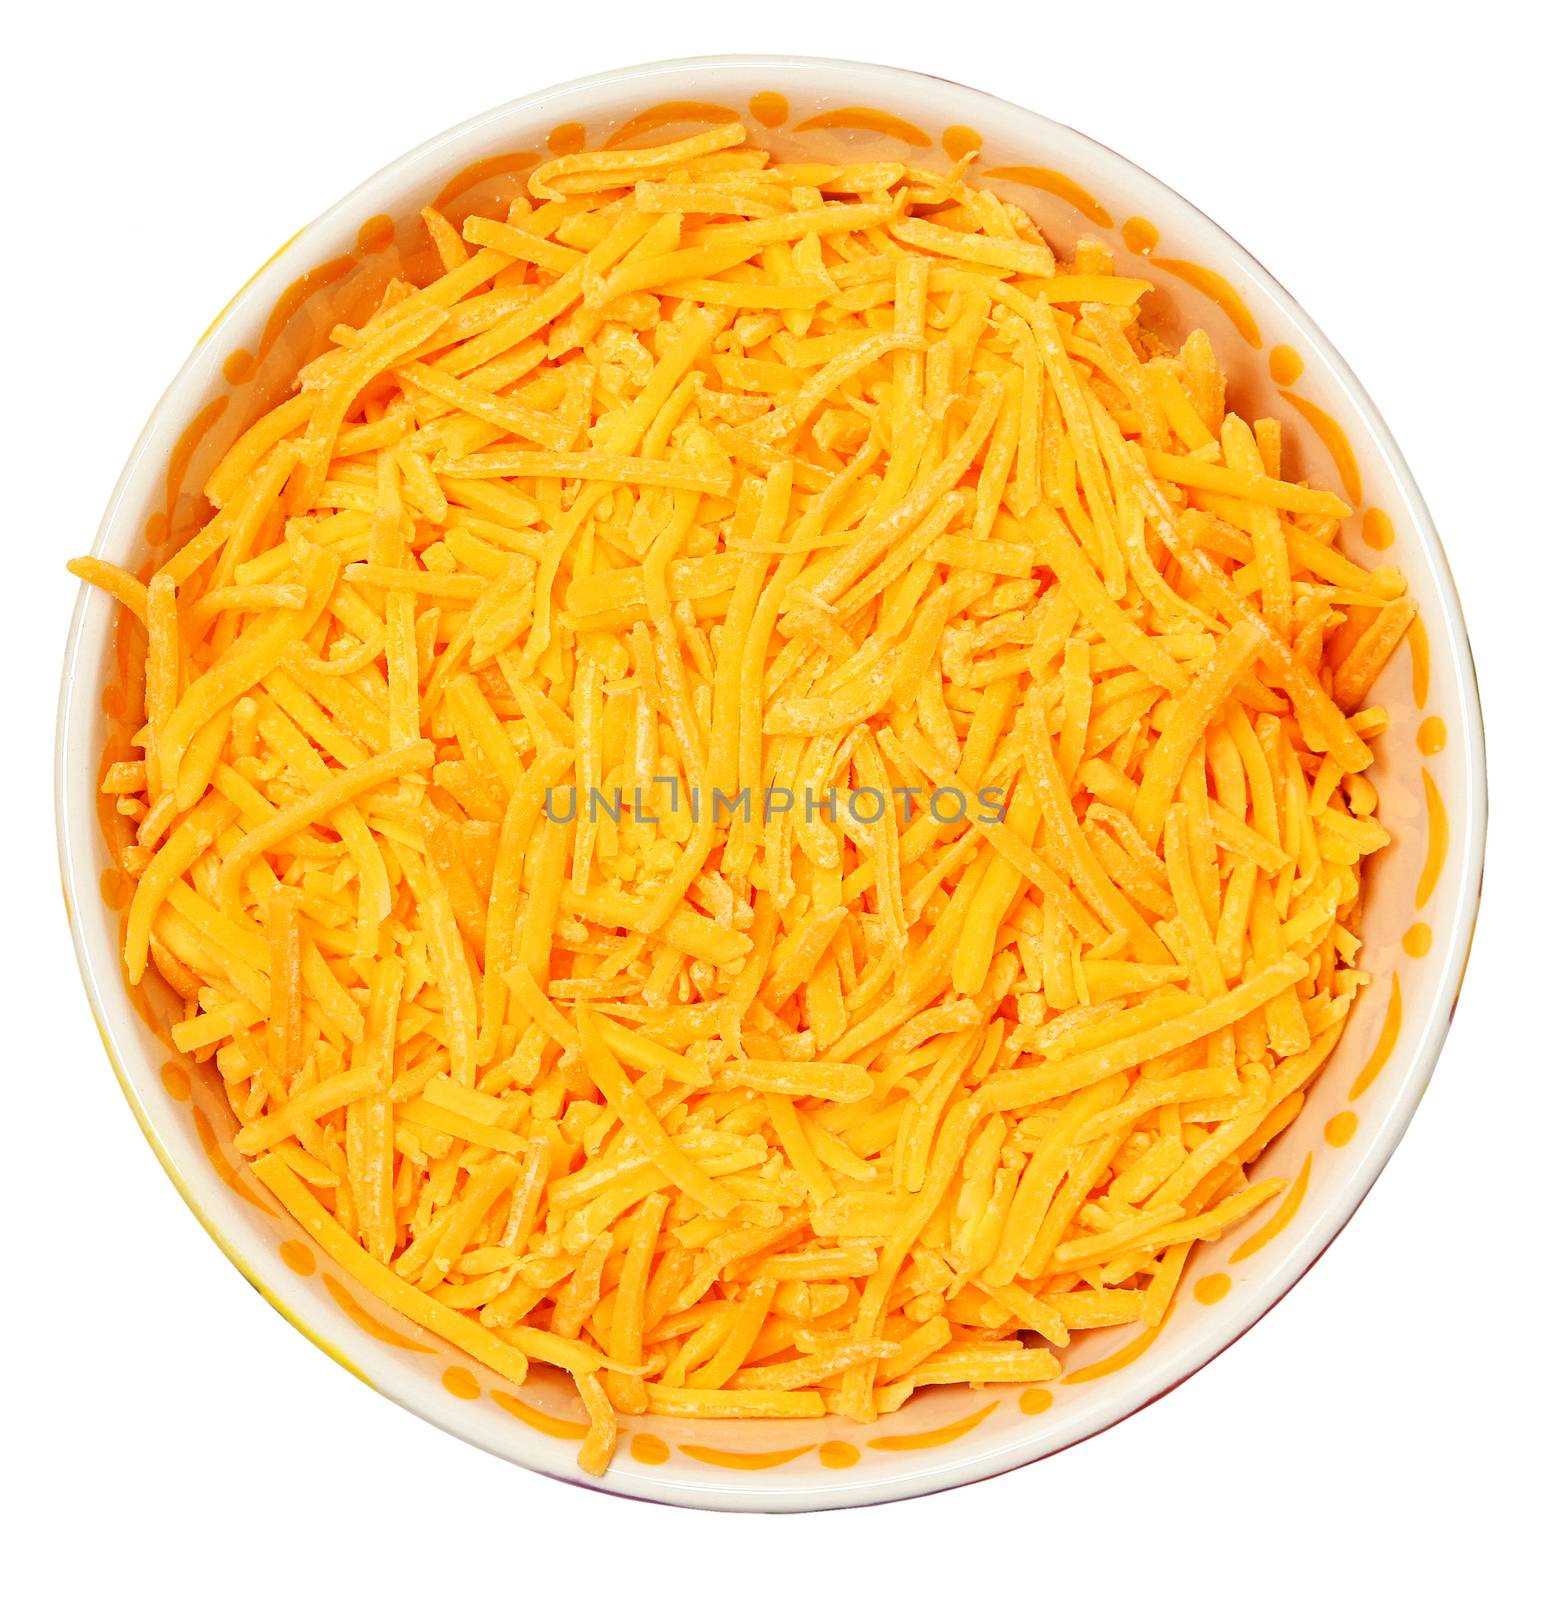 Bowl of Shredded Cheddar Over White by duplass